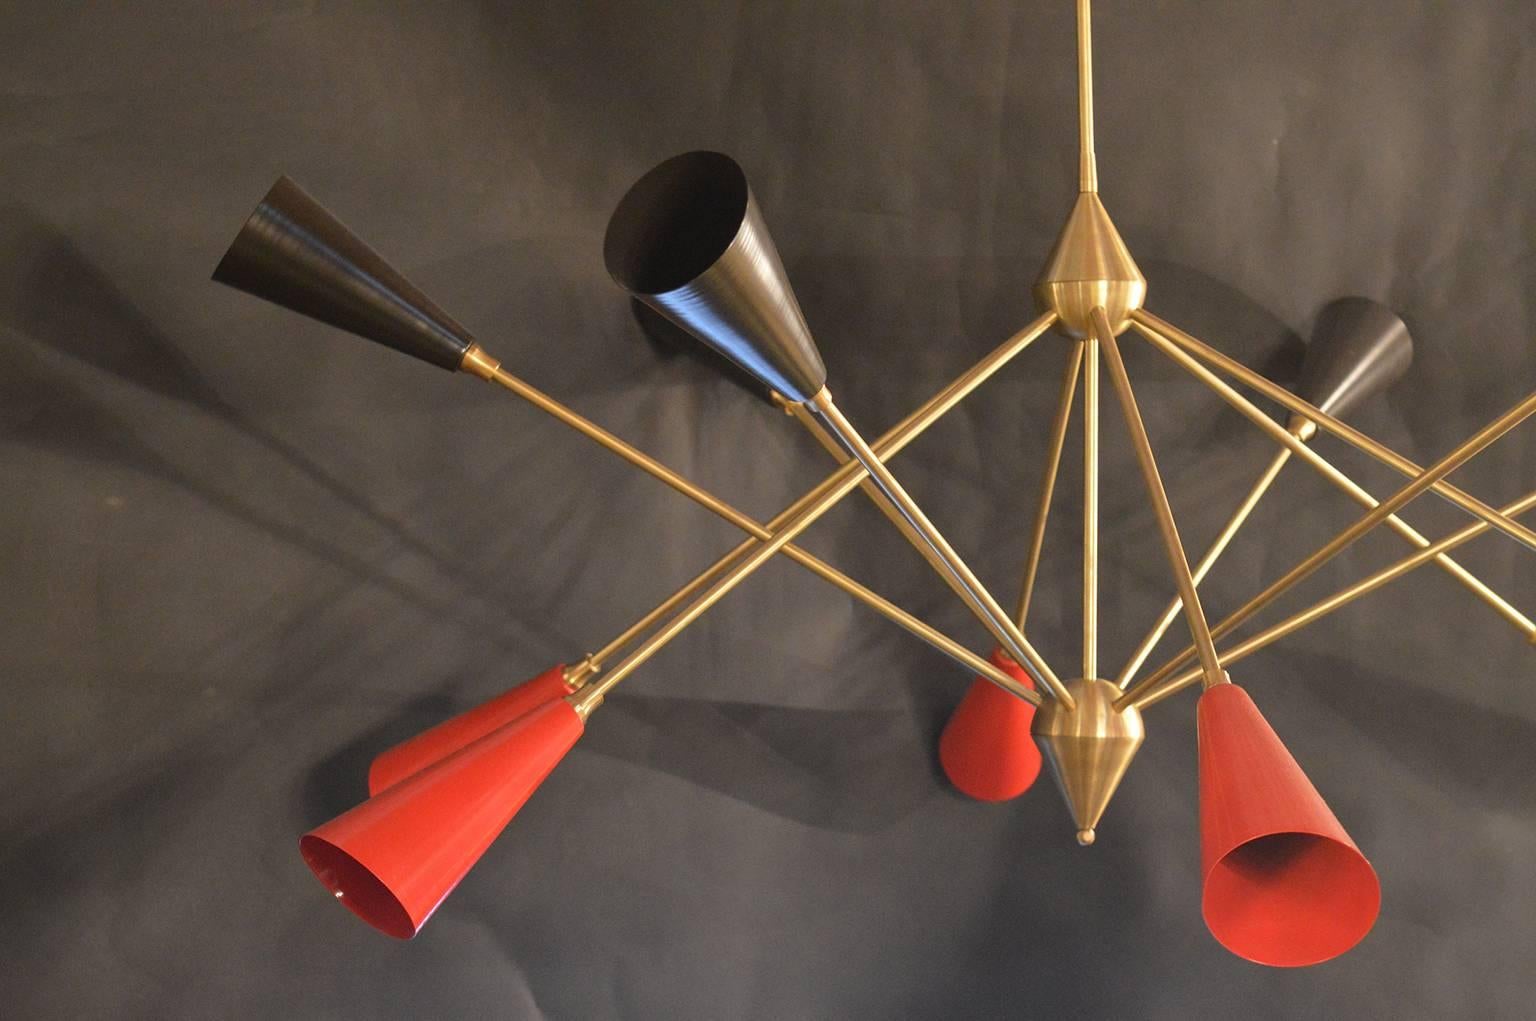 Mid-Century Modern twelve-arm chandelier with black and red shades.